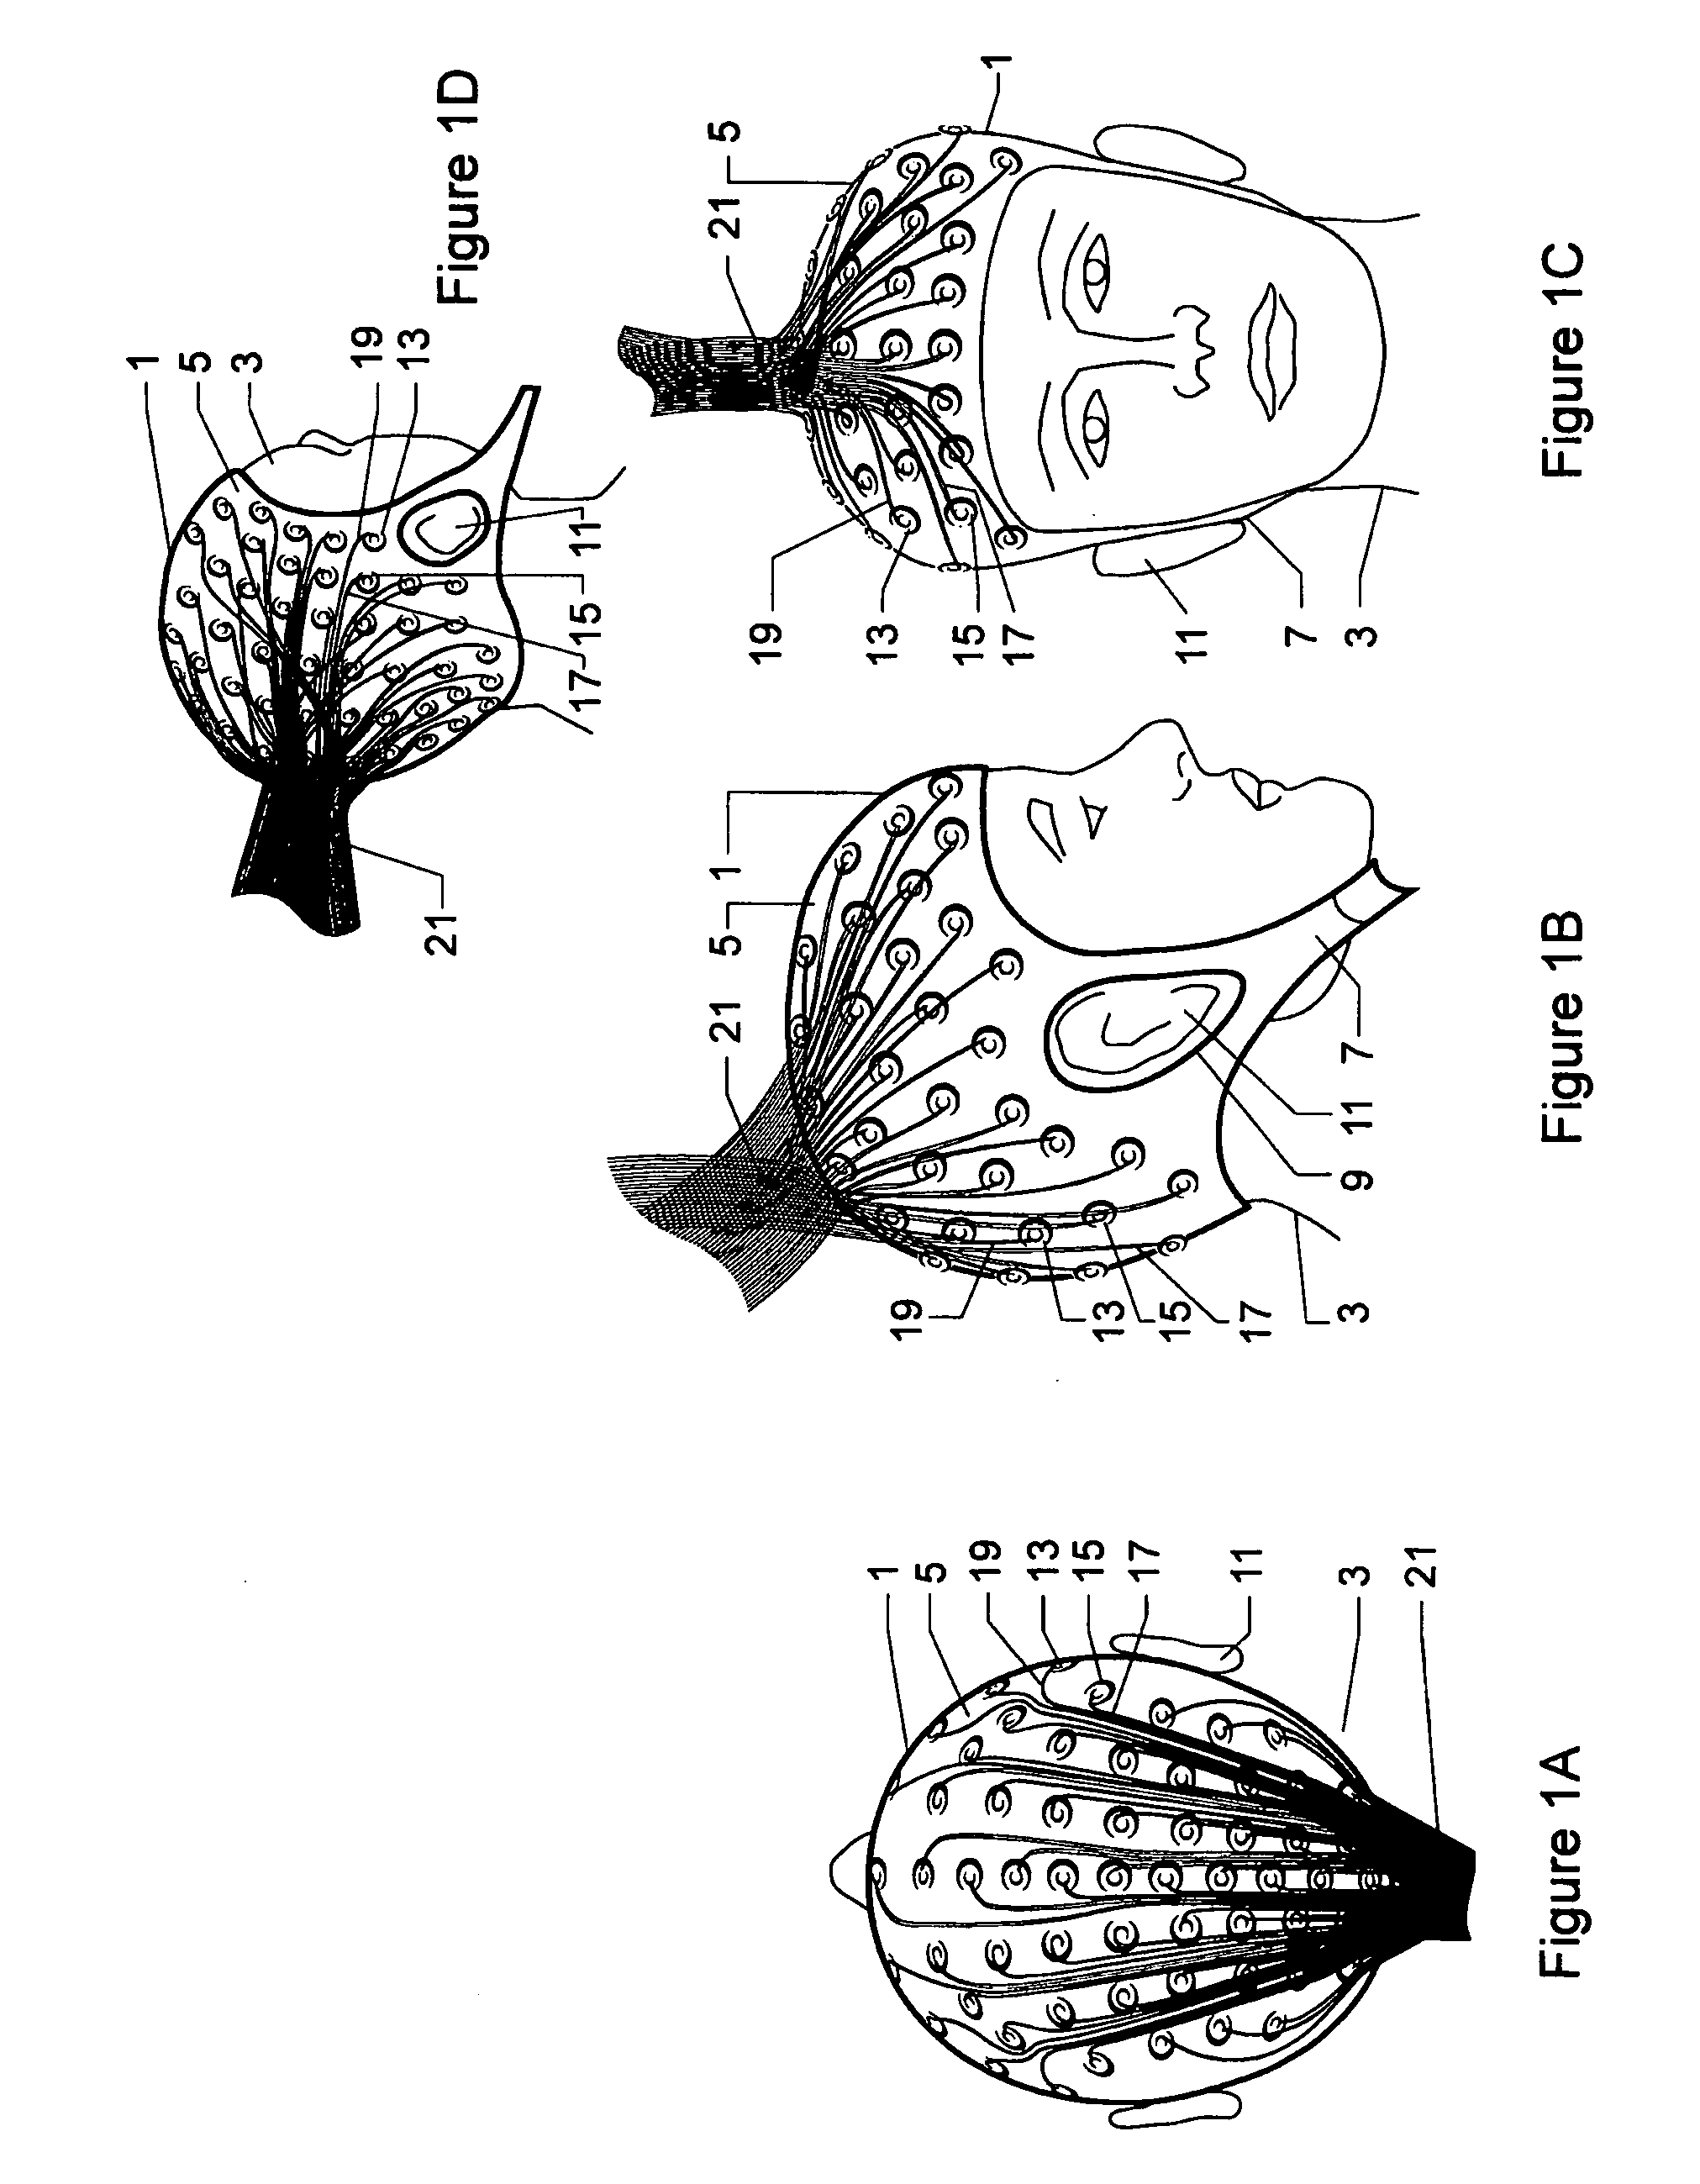 Apparatus and method for acquiring a signal